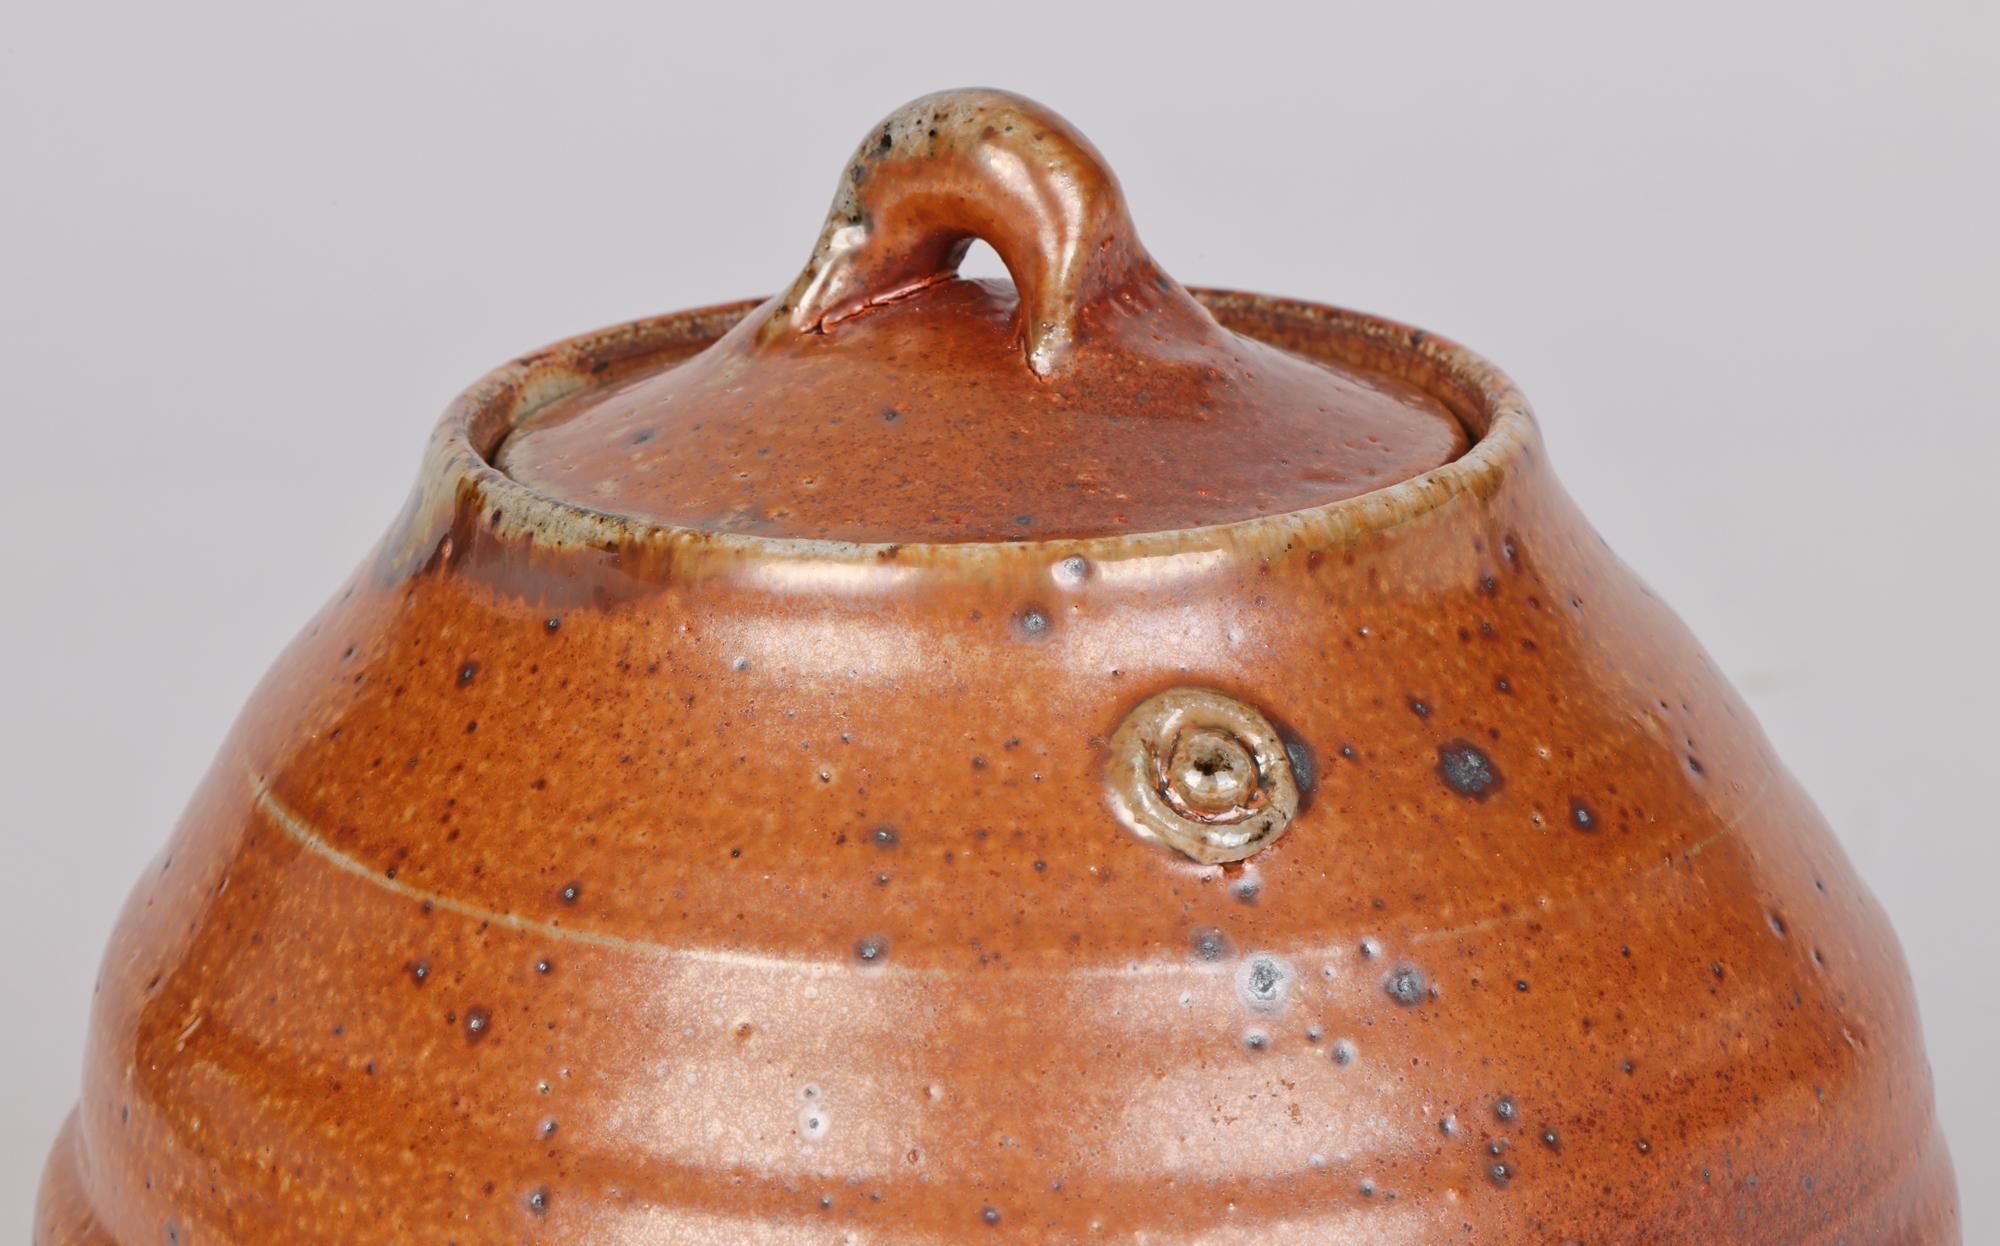 An impressive and stylish studio pottery lidded vessel decorated in brown salt glazes by renowned British potter John Jelfs (British, b.1946) and made at the Cotswold Pottery and believed to date from the 20th century. The jar shaped vessel is hand